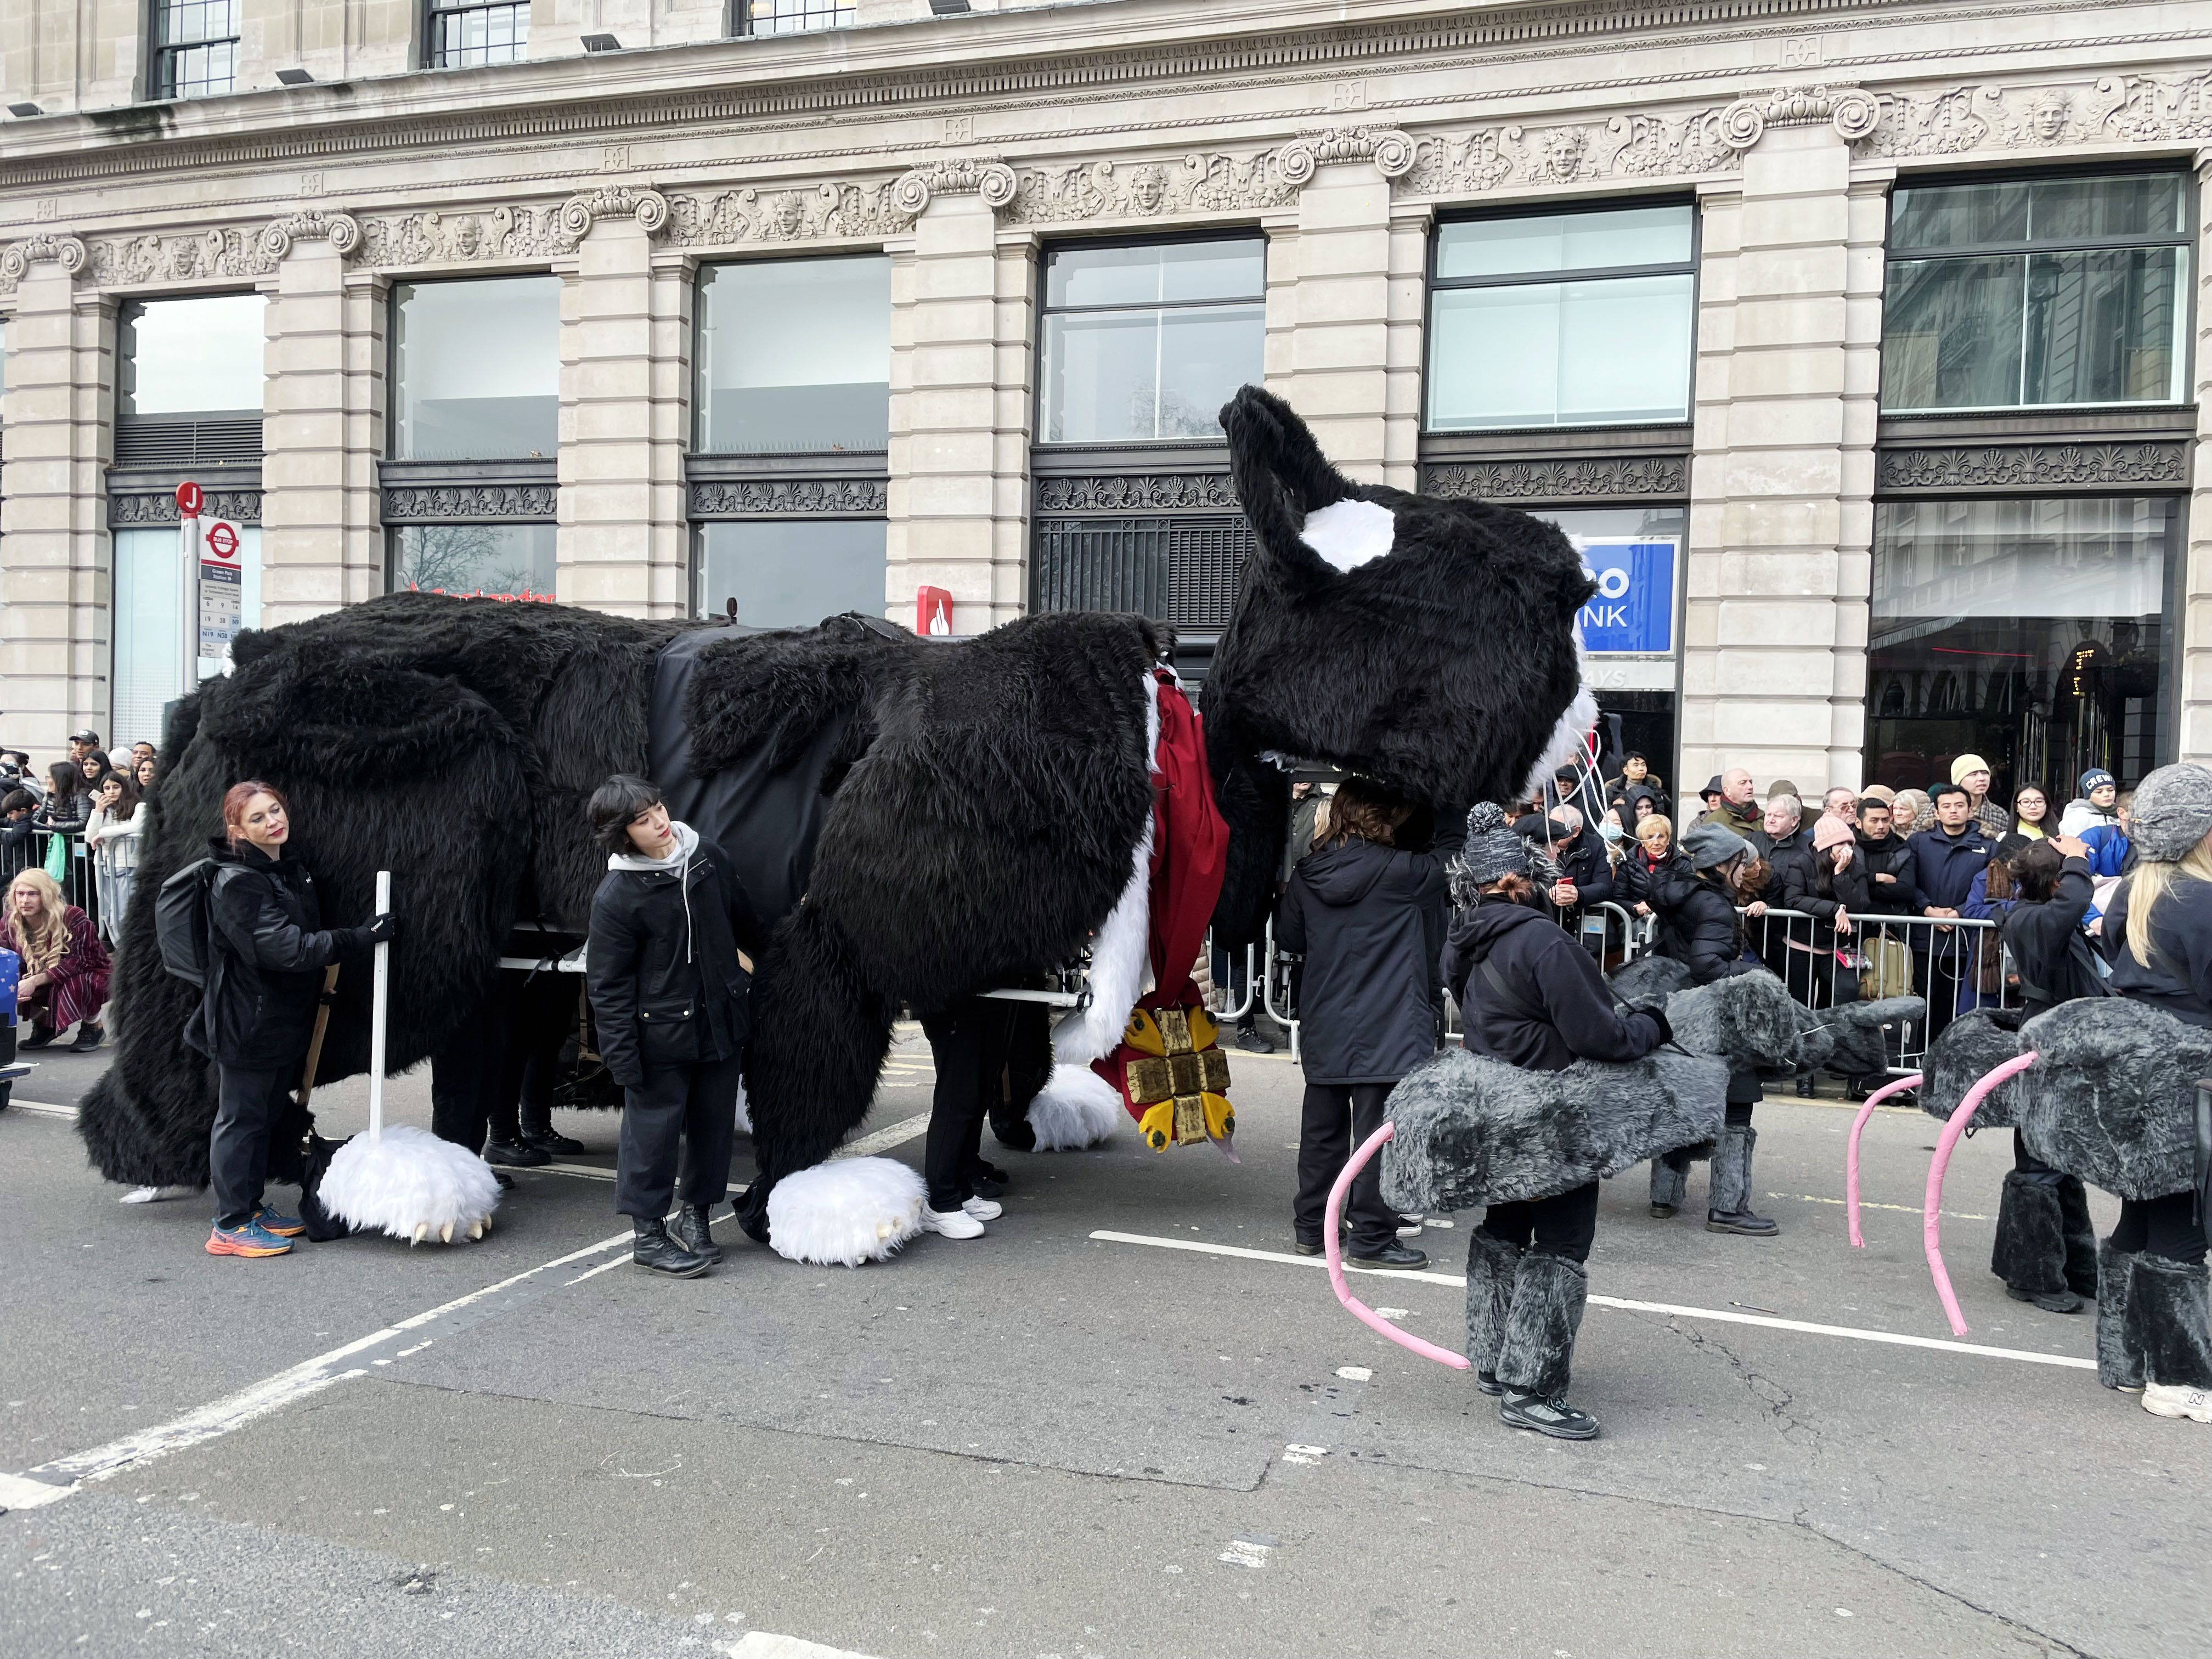 Image shows a crowd of spectators looking at a side view of a large black and white cat puppet with several people holding the cat. There are people dressed as mice surrounding the cat.